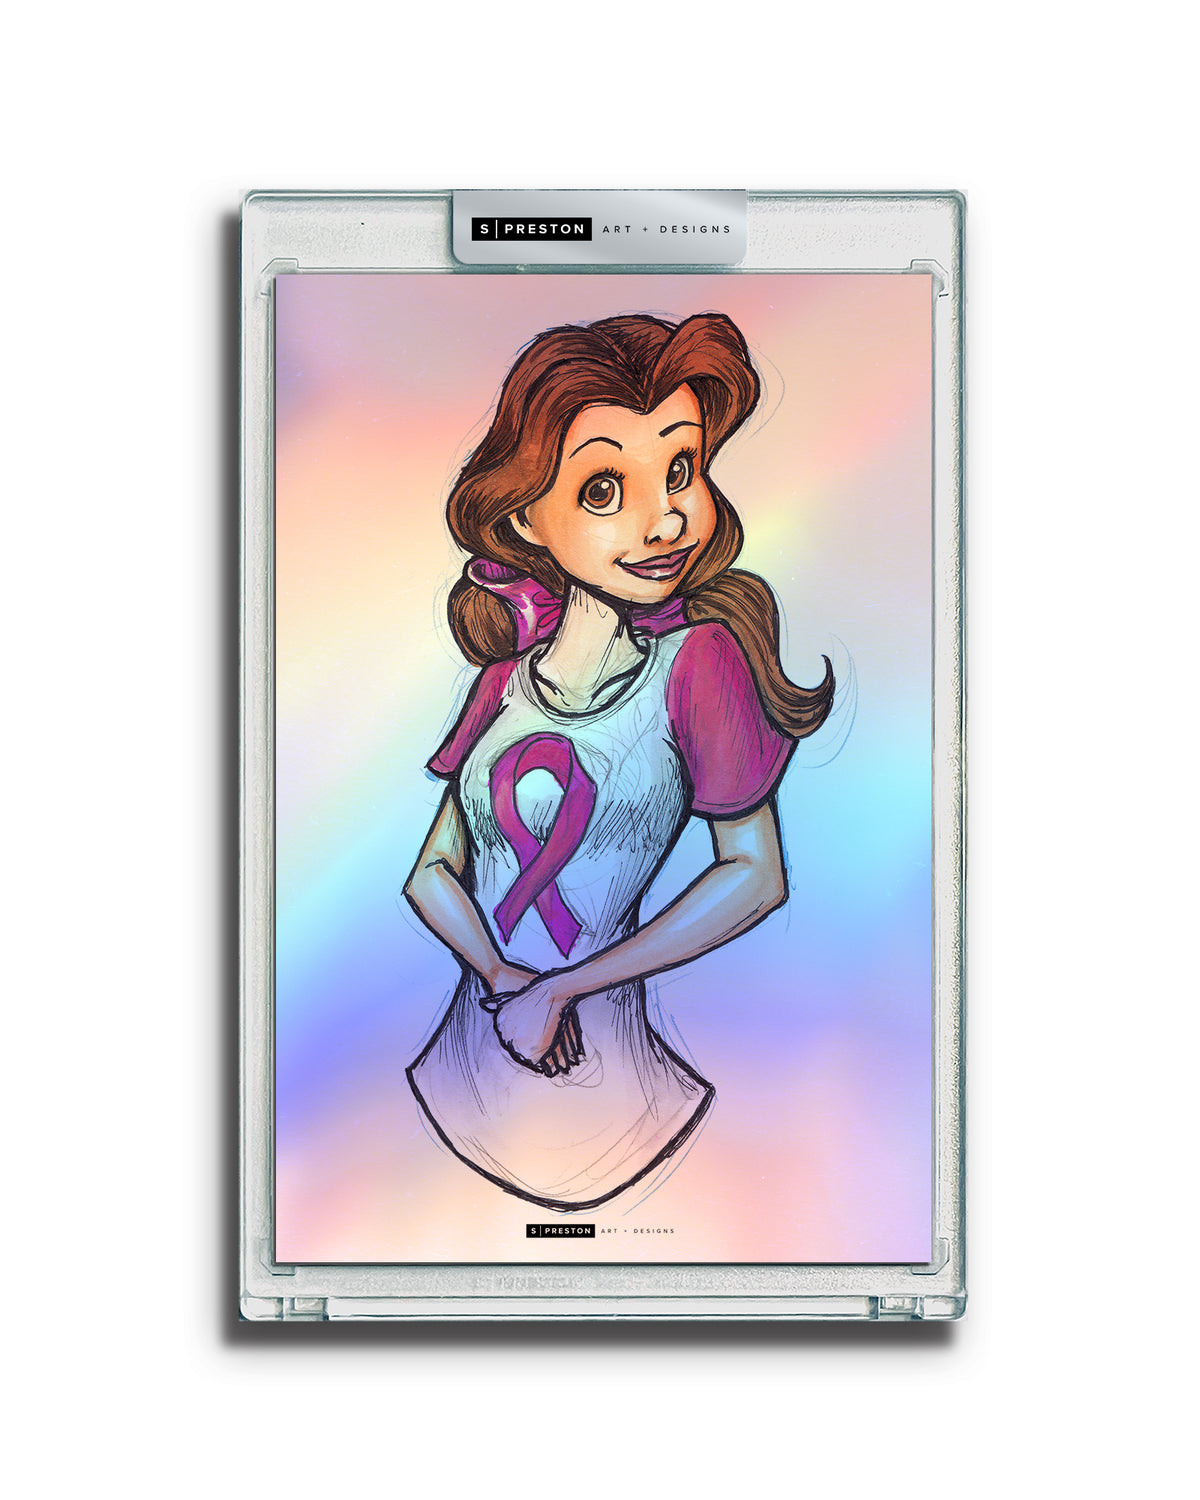 Belle-lieve In A Cure Limited Edition Art Card Slab